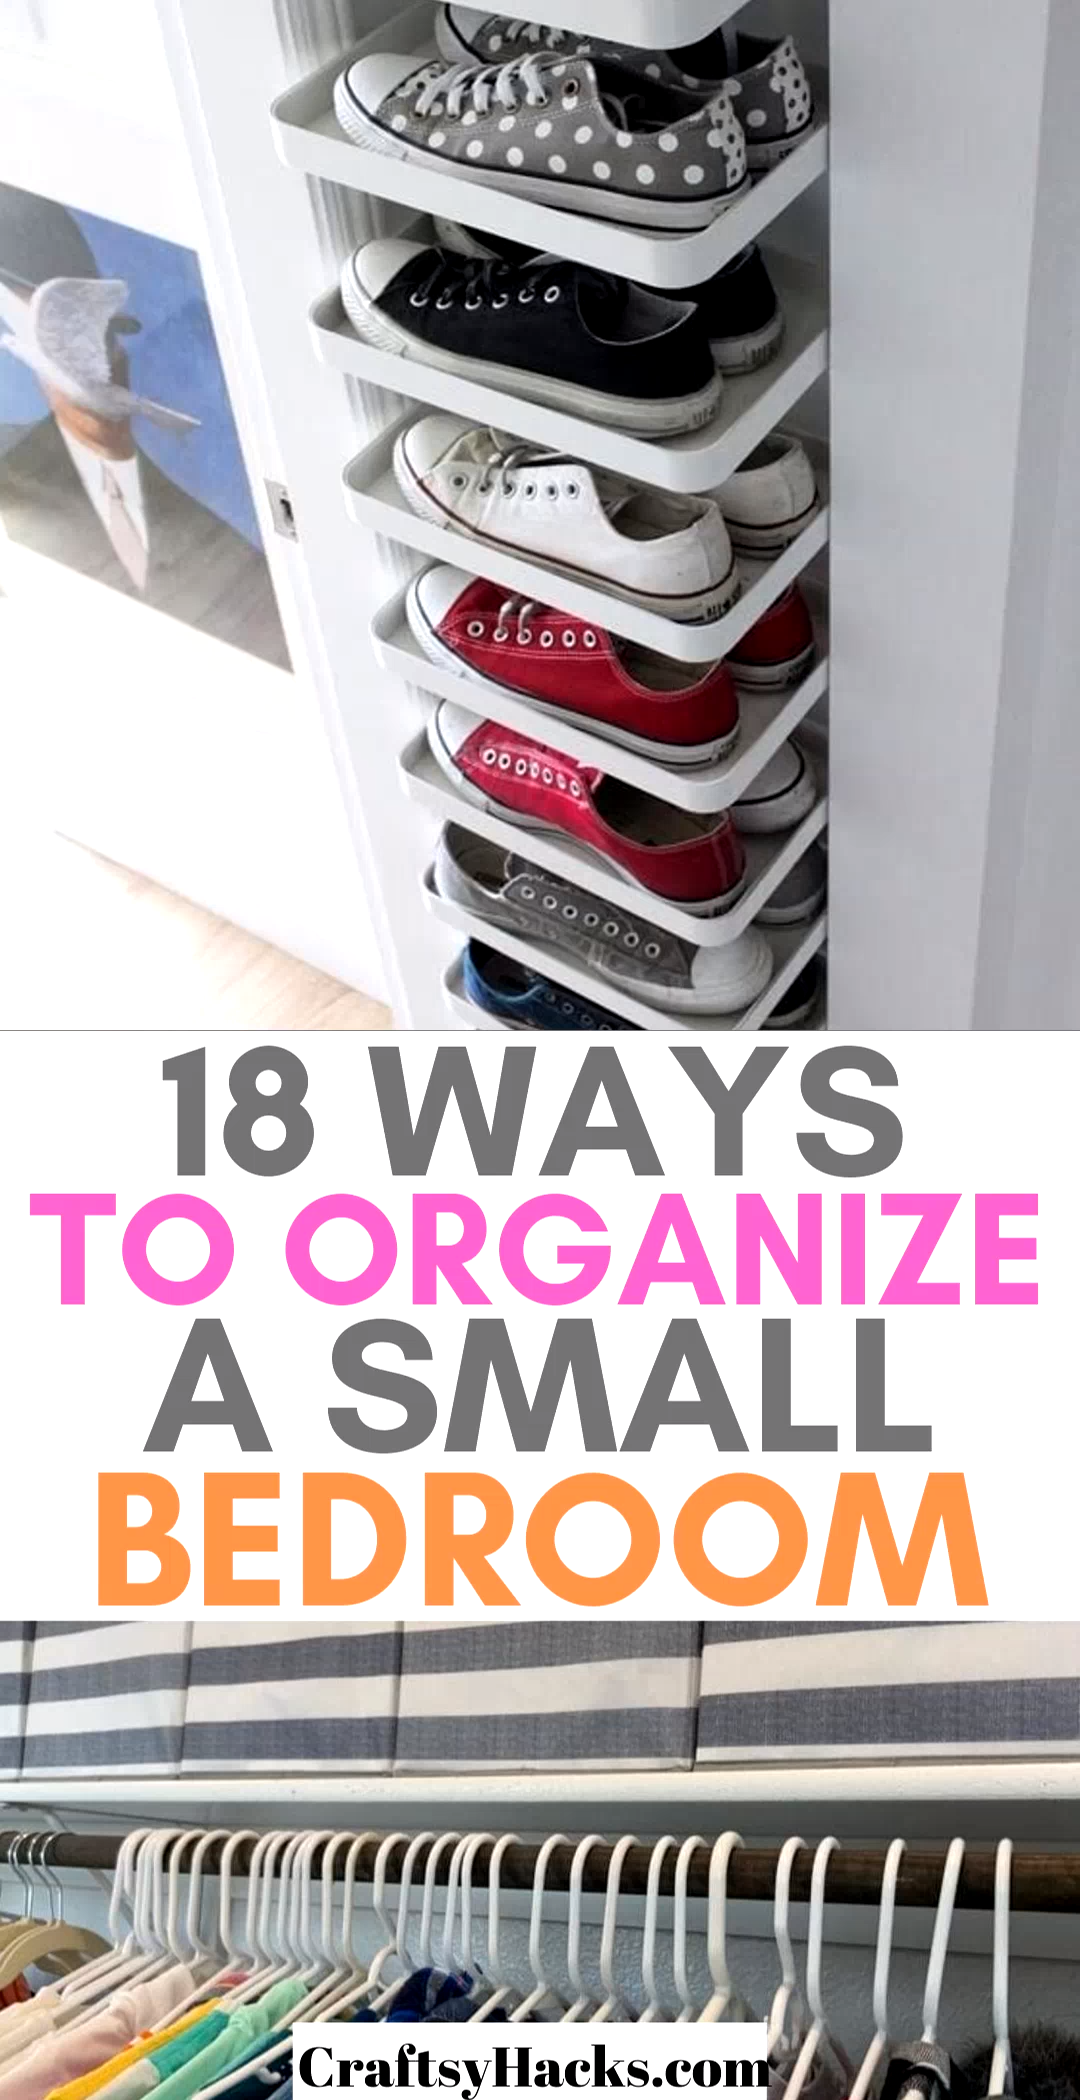 40 Ways to Organize a Small Bedroom - 40 Ways to Organize a Small Bedroom -   17 diy Room hacks ideas